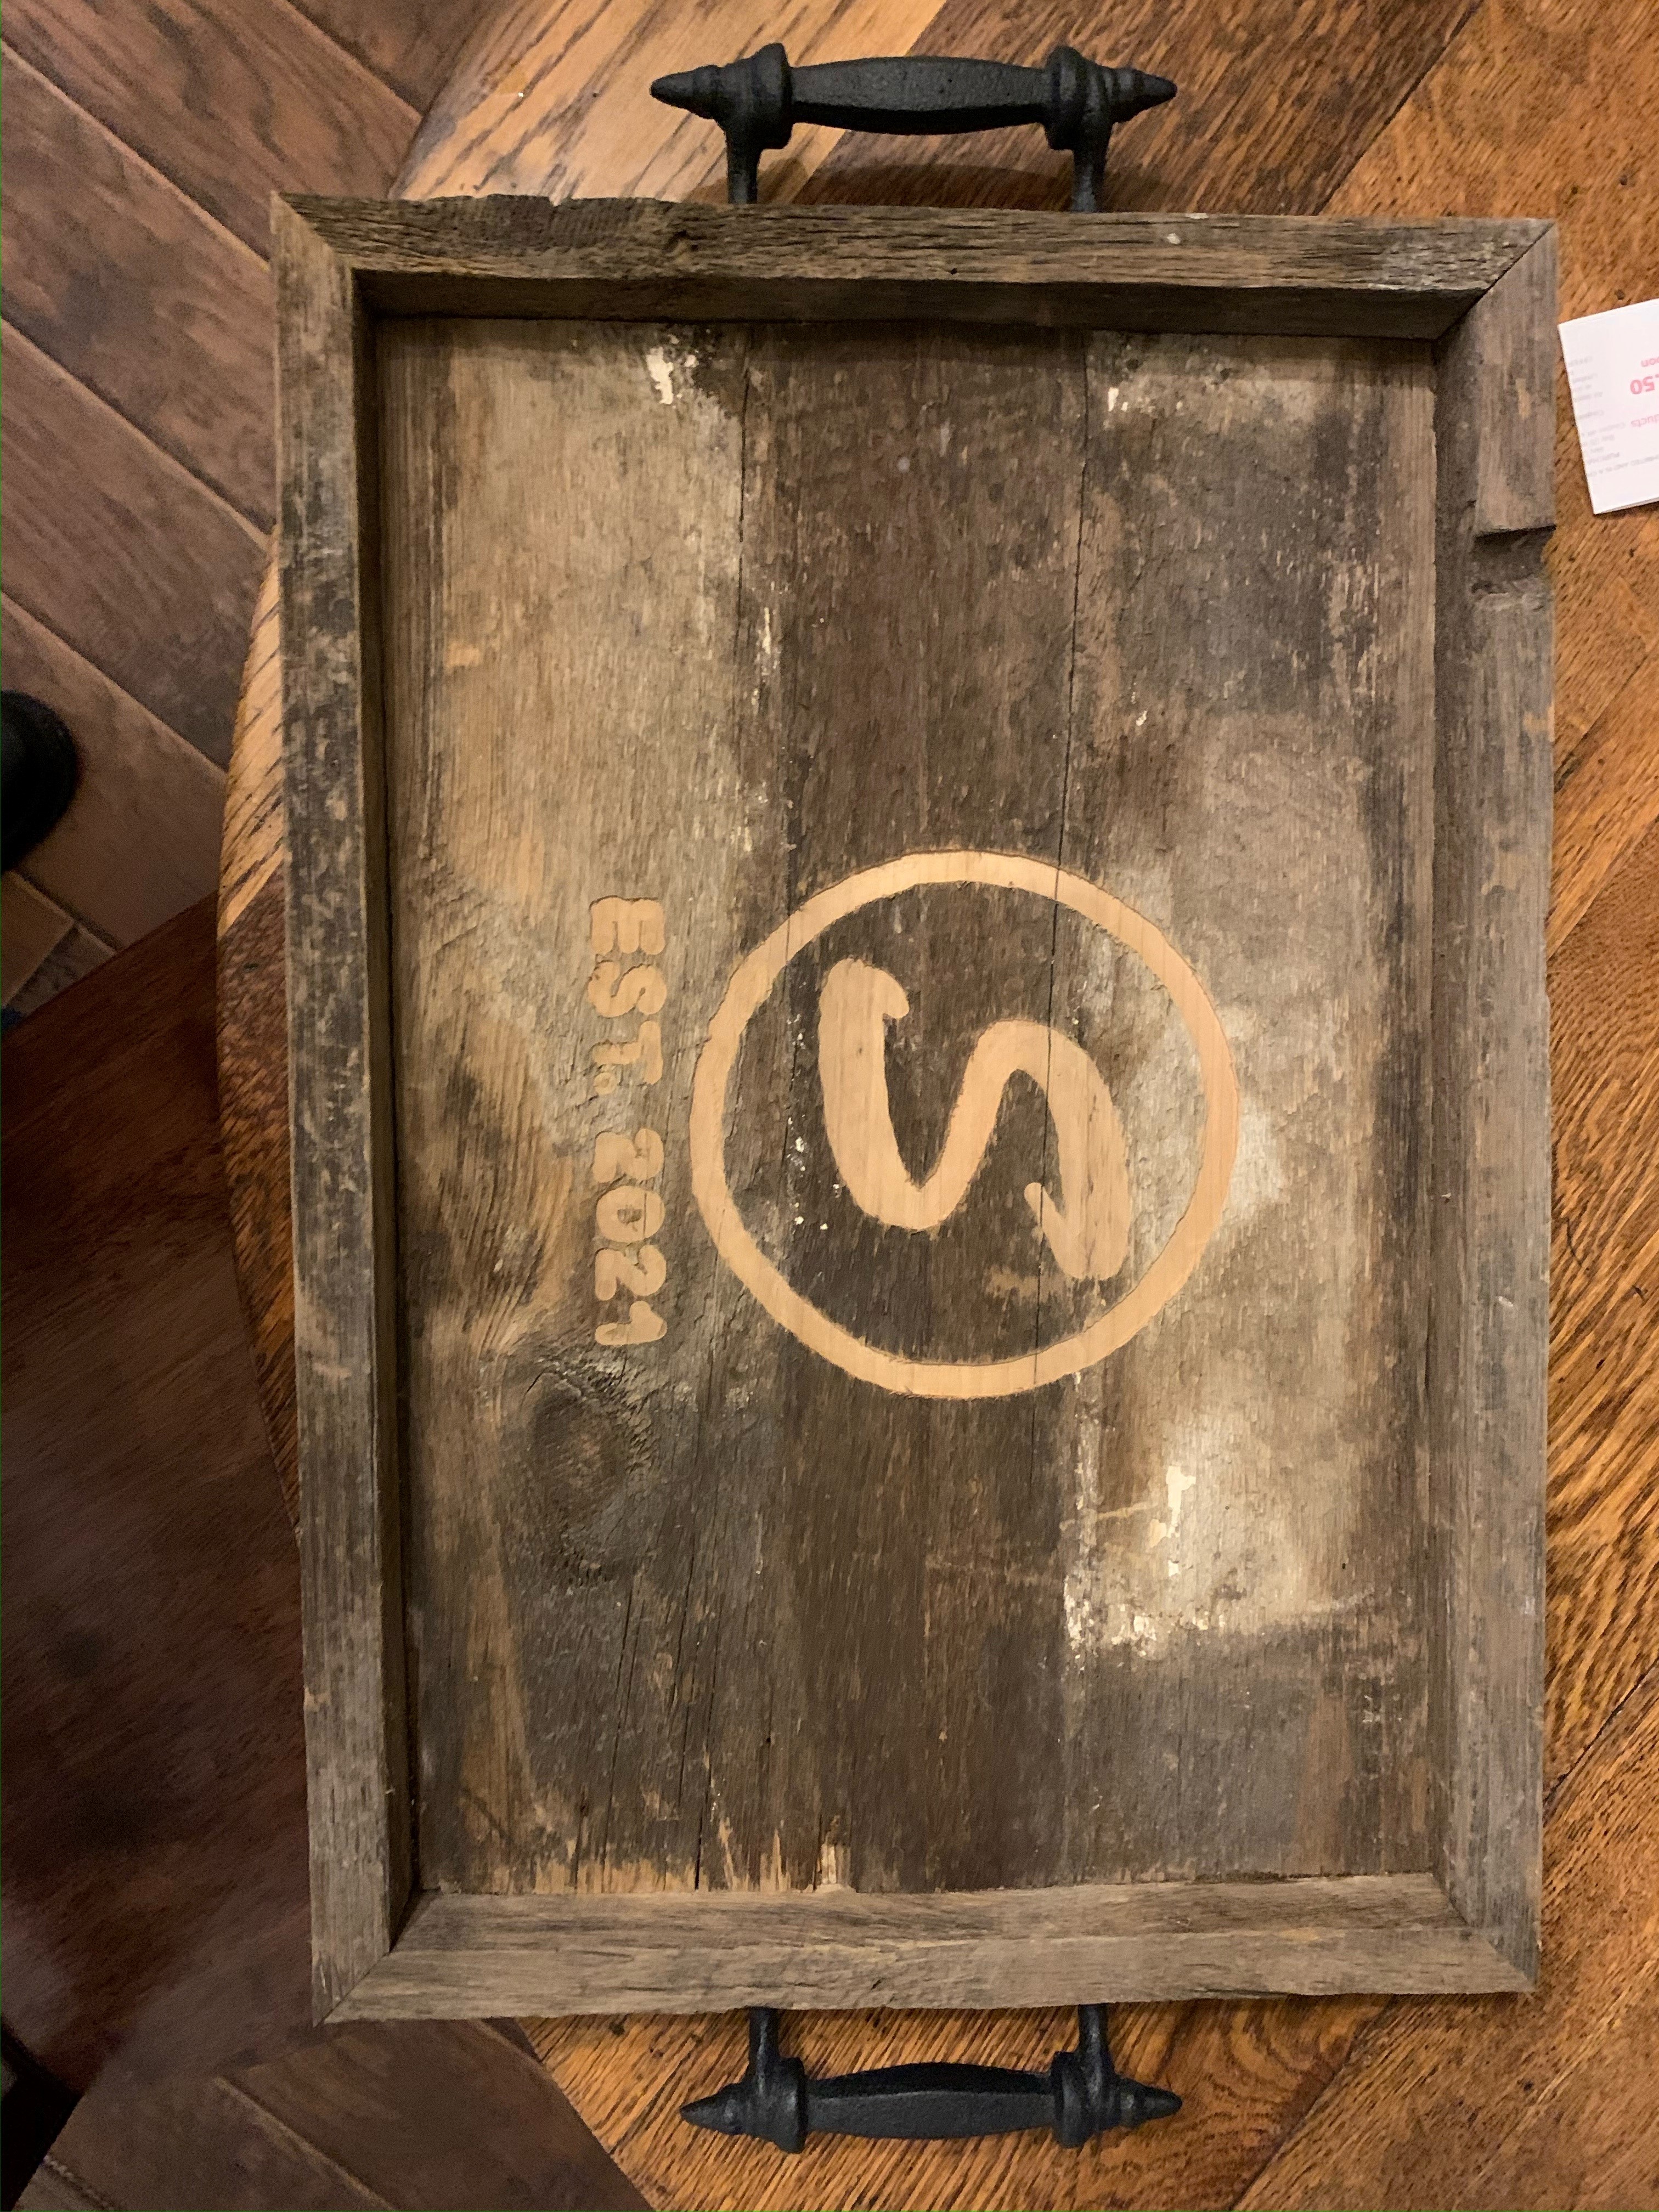 A serving tray Brad made from 150-year-old barn wood.